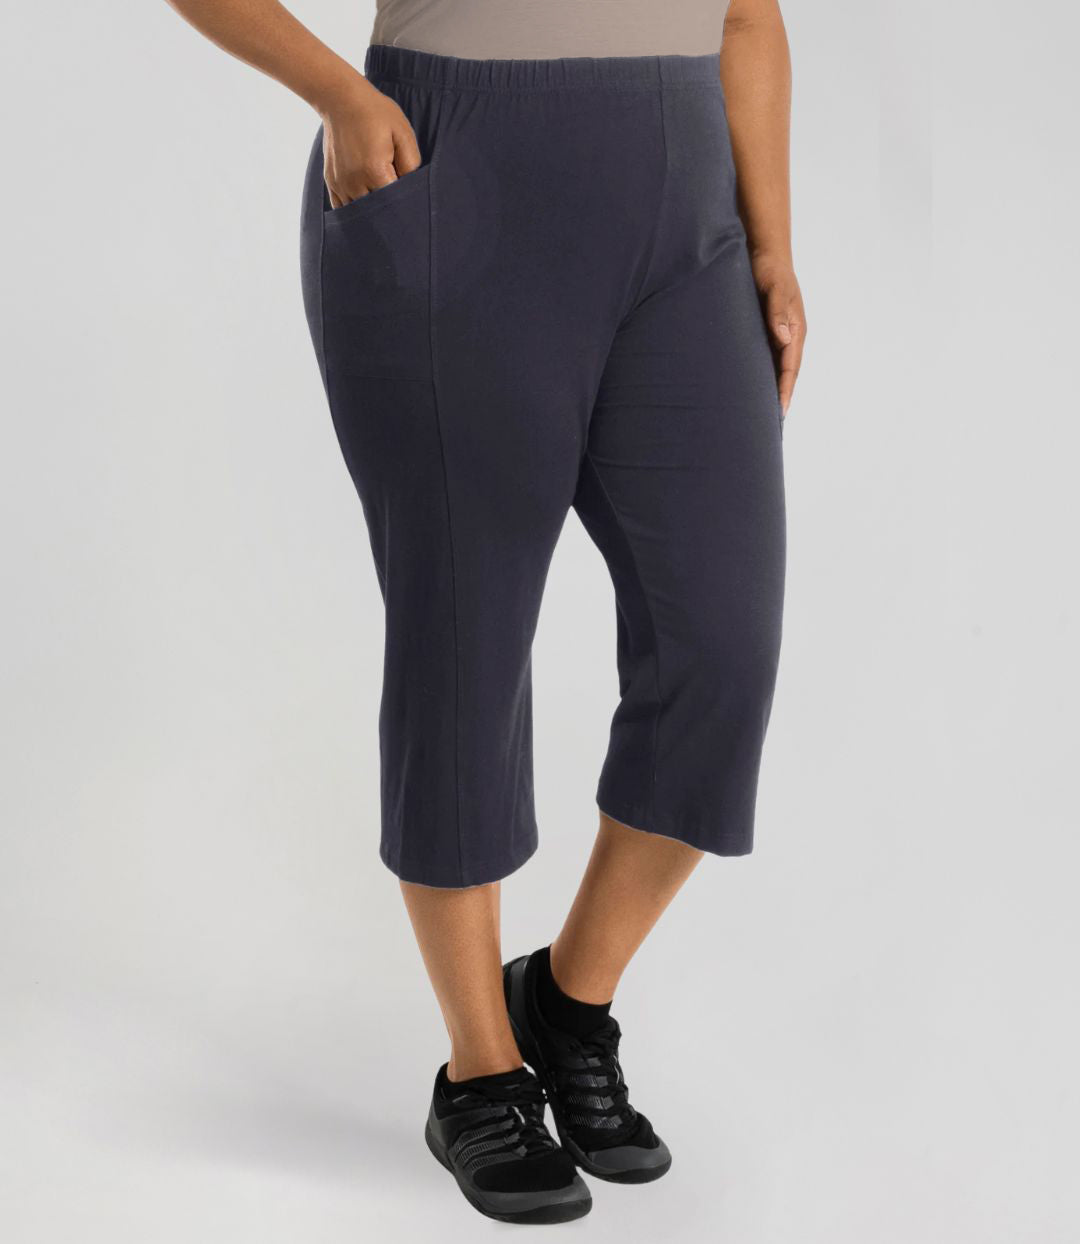 Plus size woman is facing at a side angle, right hand in pocket, left arm and hand to side, wearing JunoActive Stretch Naturals side pocket plus size capri pant bottom. The hemline comes to mid-calf and hugs the body without being skin tight. Color is oak gray.